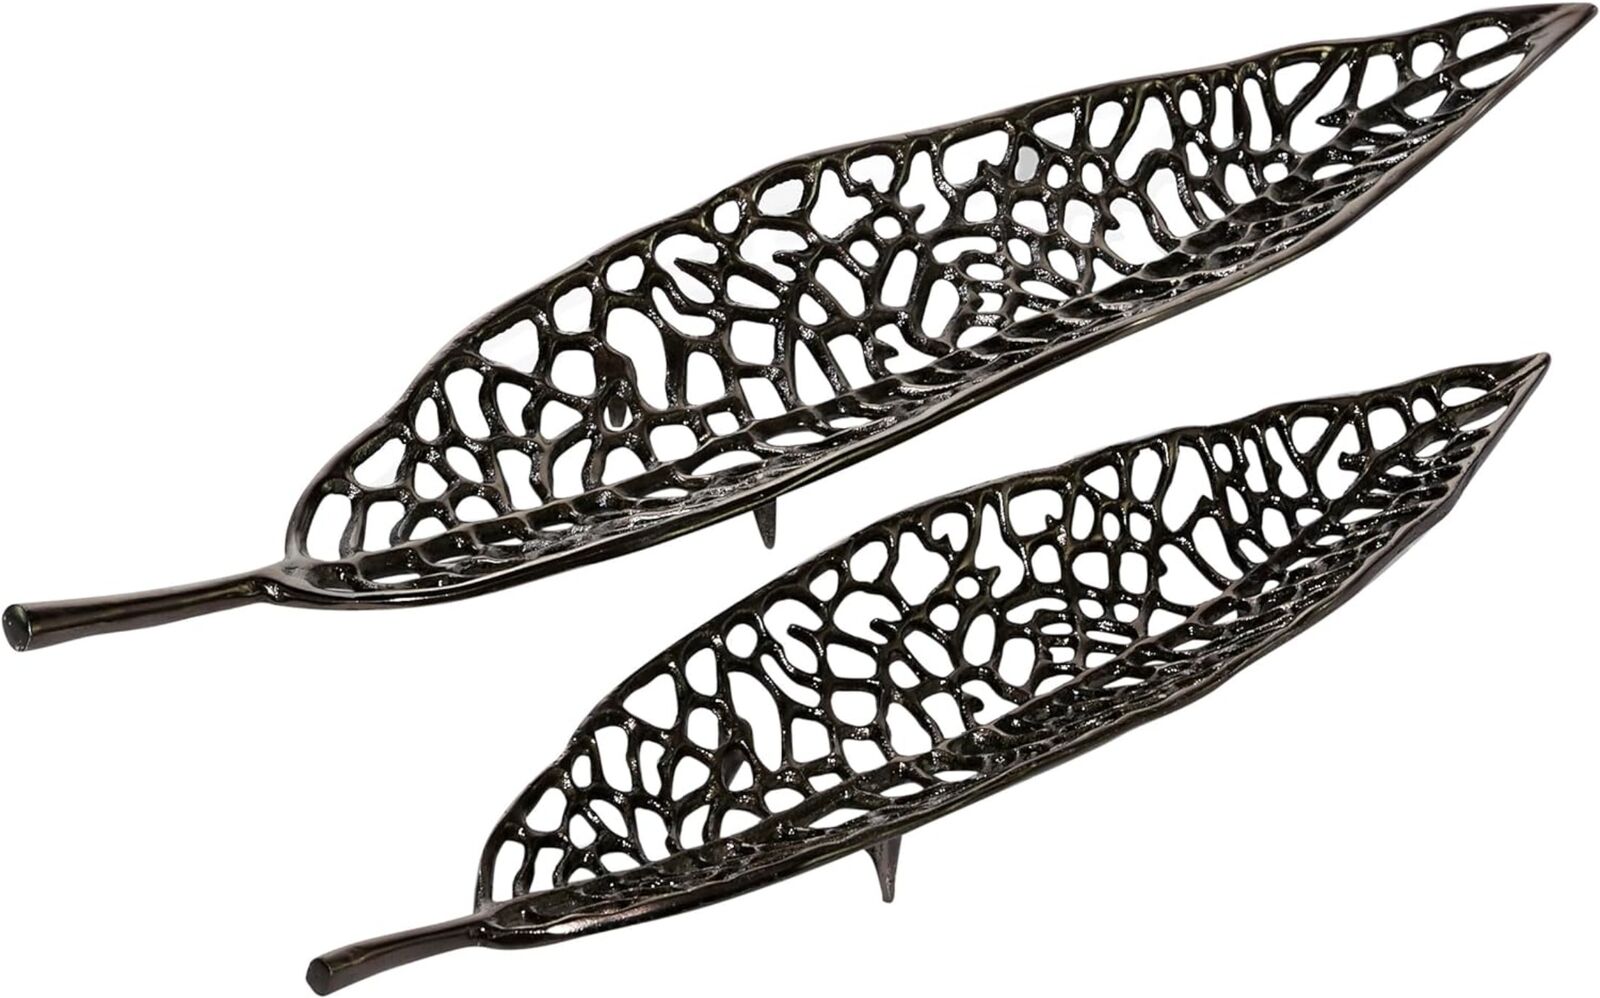 Metal Leaf Tray, This Decorative Tray Set Is Crafted With Solid Metal Material